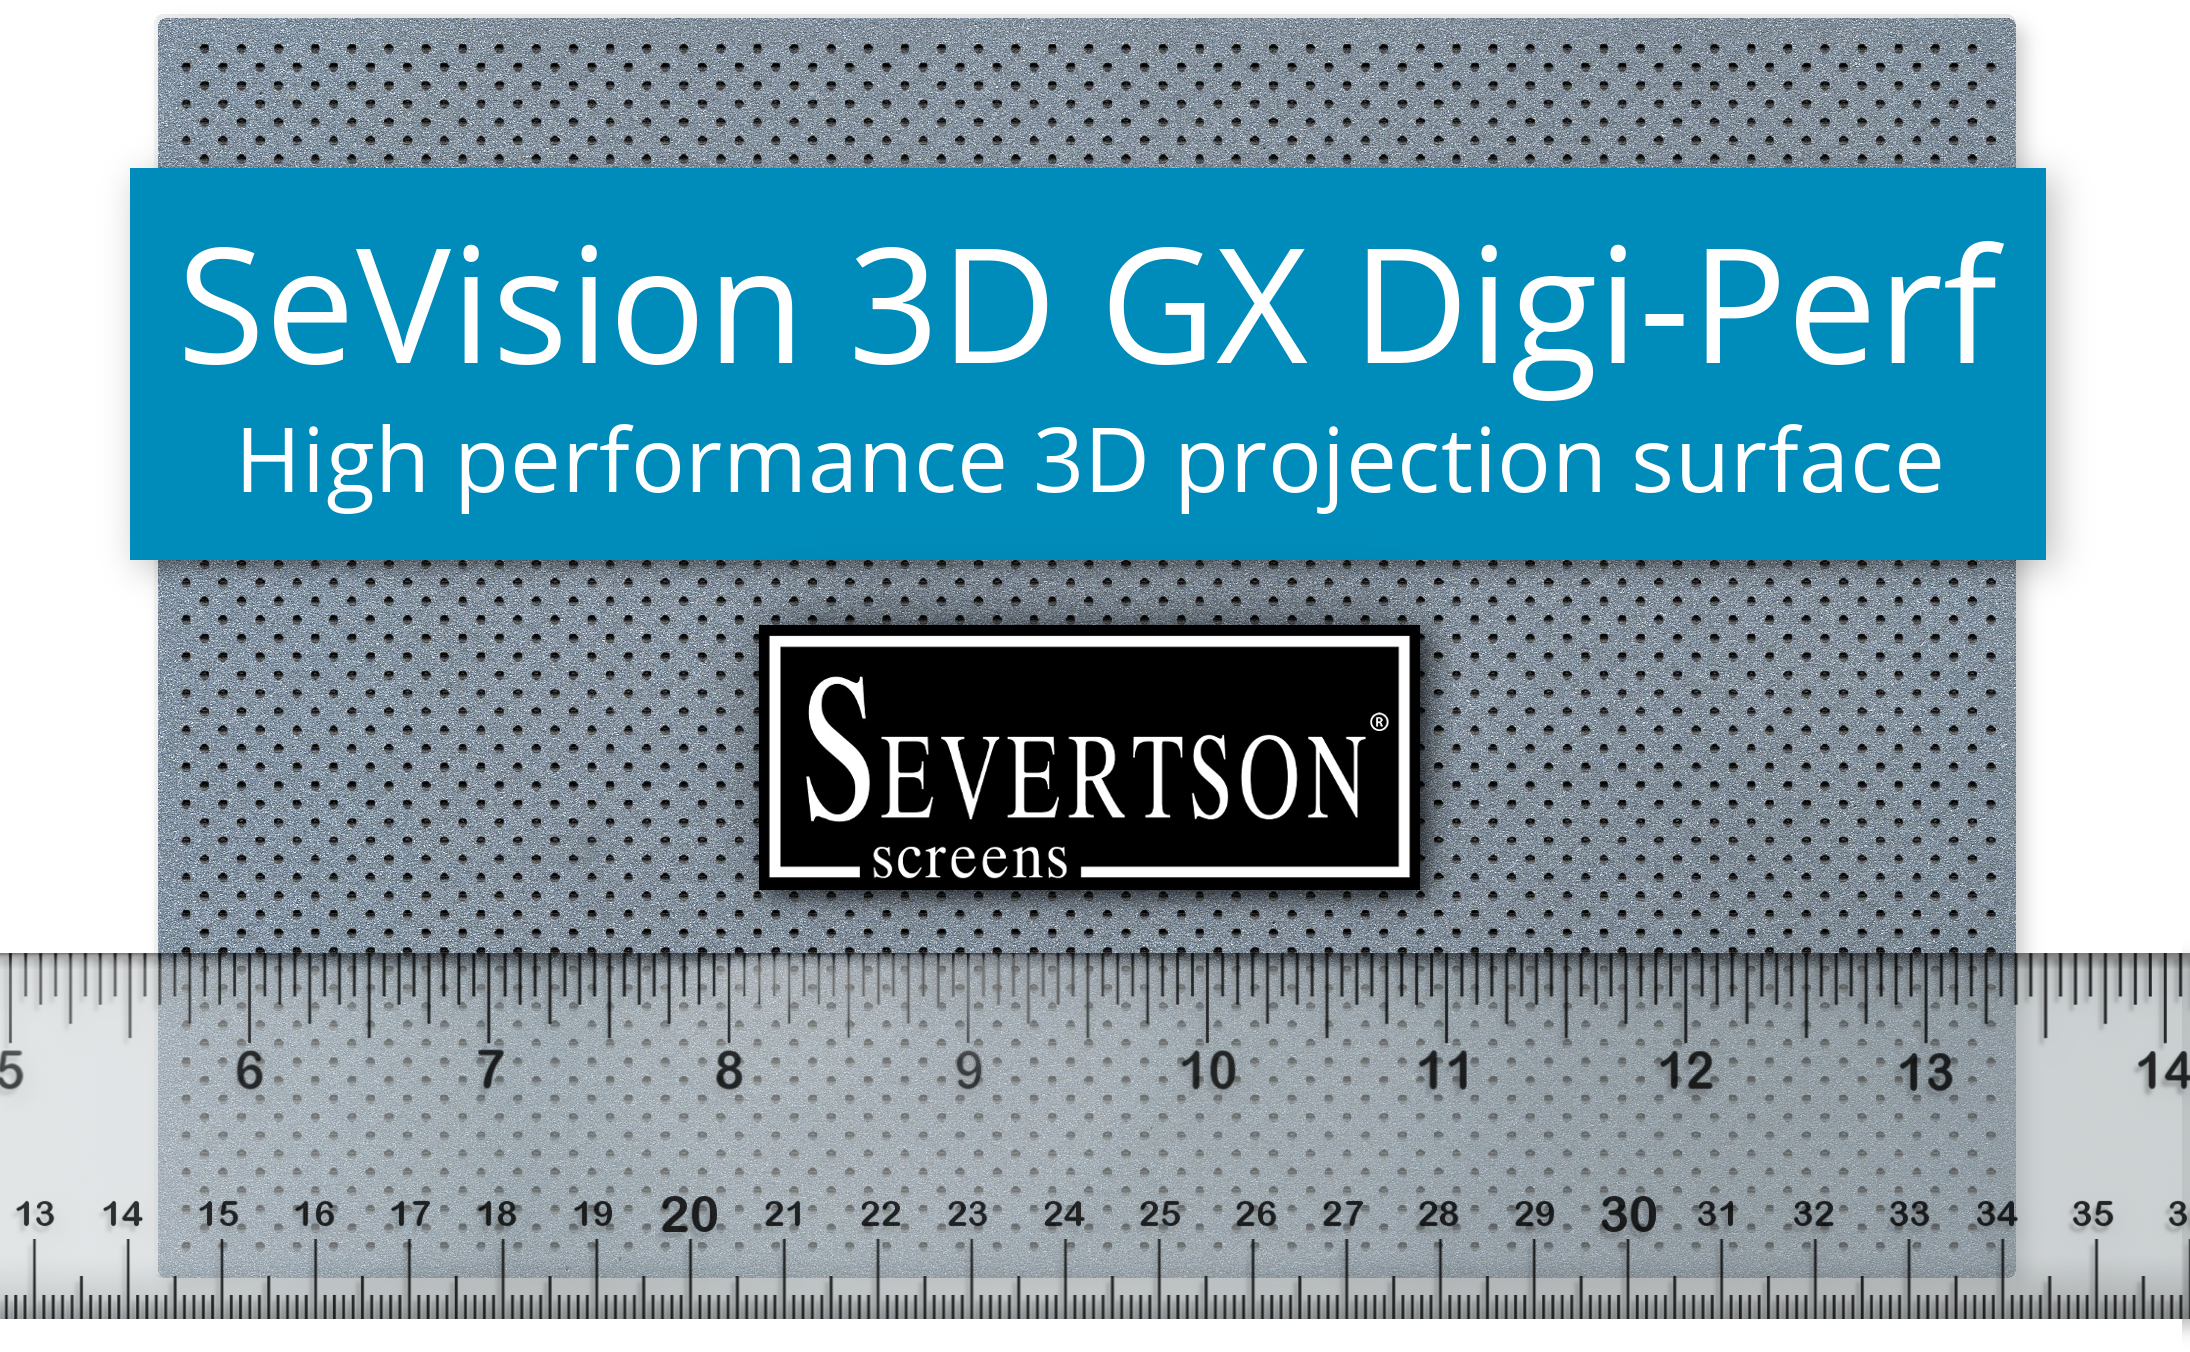 Severtson digi-perf provides optimal open space for excellent acoustics and flawless projection. The SeVision 3D GX coating enhances this surface to also provide outstanding gain and contrast for 3D images.